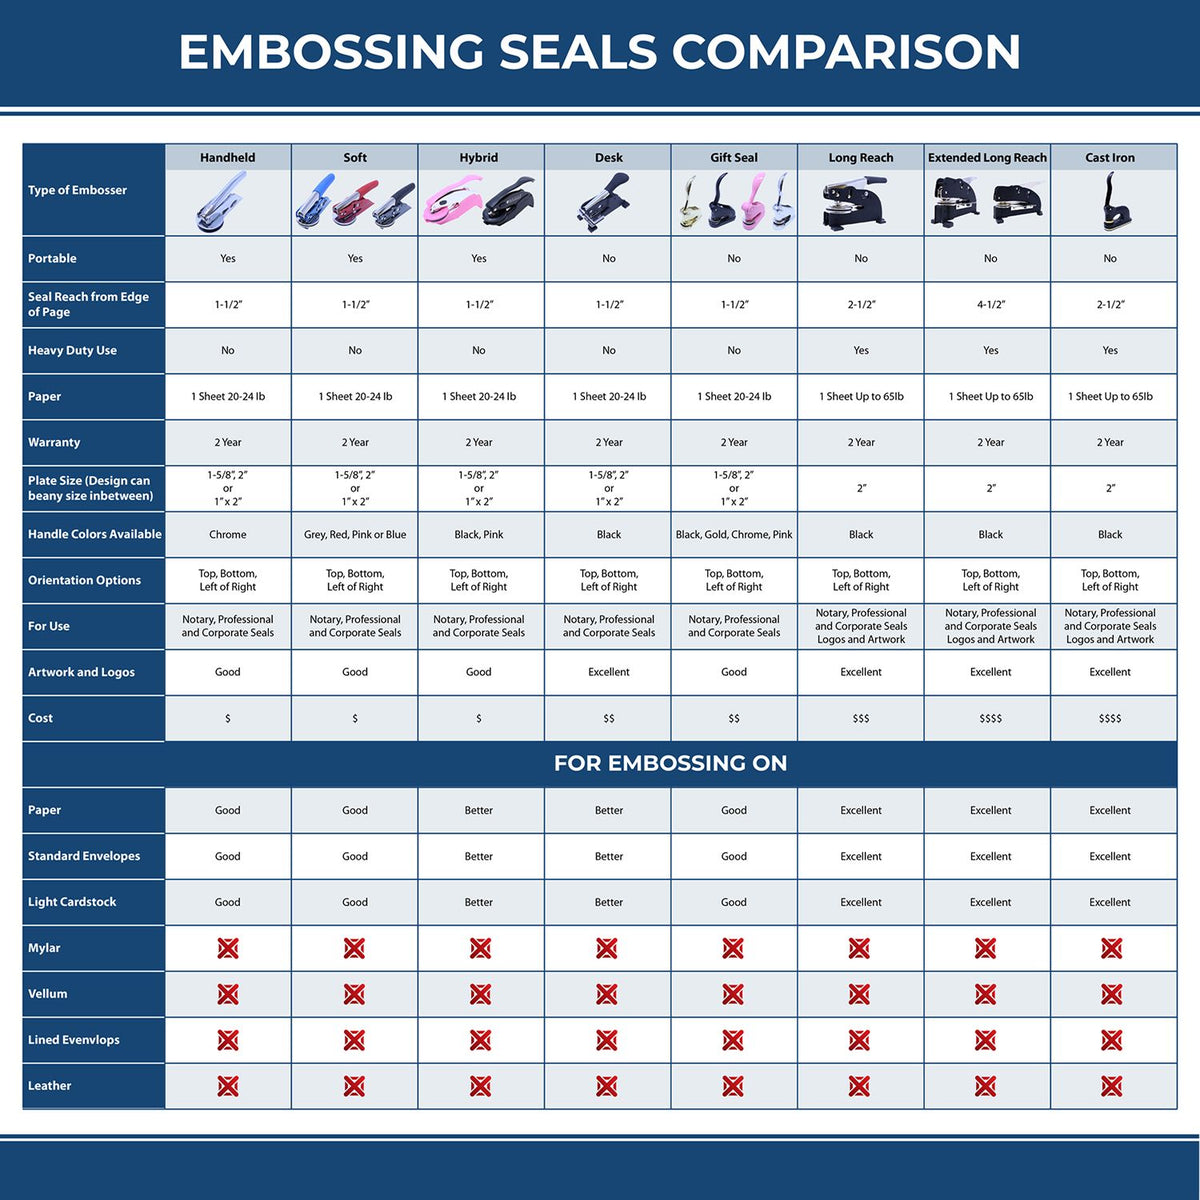 A comparison chart for the different types of mount models available for the Virginia Engineer Desk Seal.